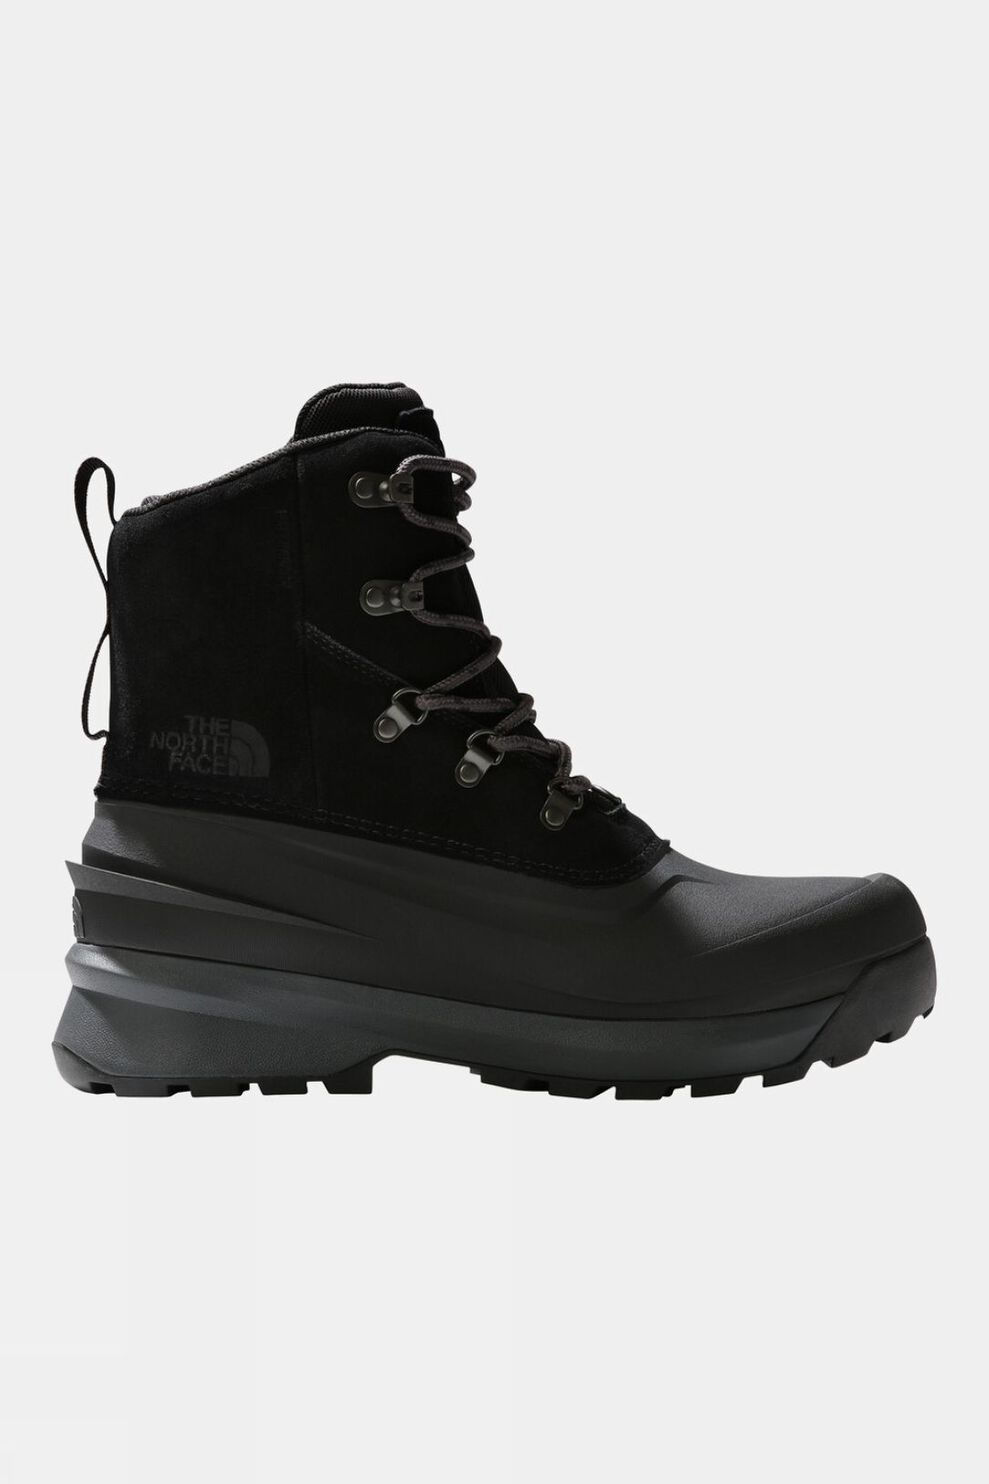 The North Face Mens Chilkat V Lace Waterproof Hiking Boots